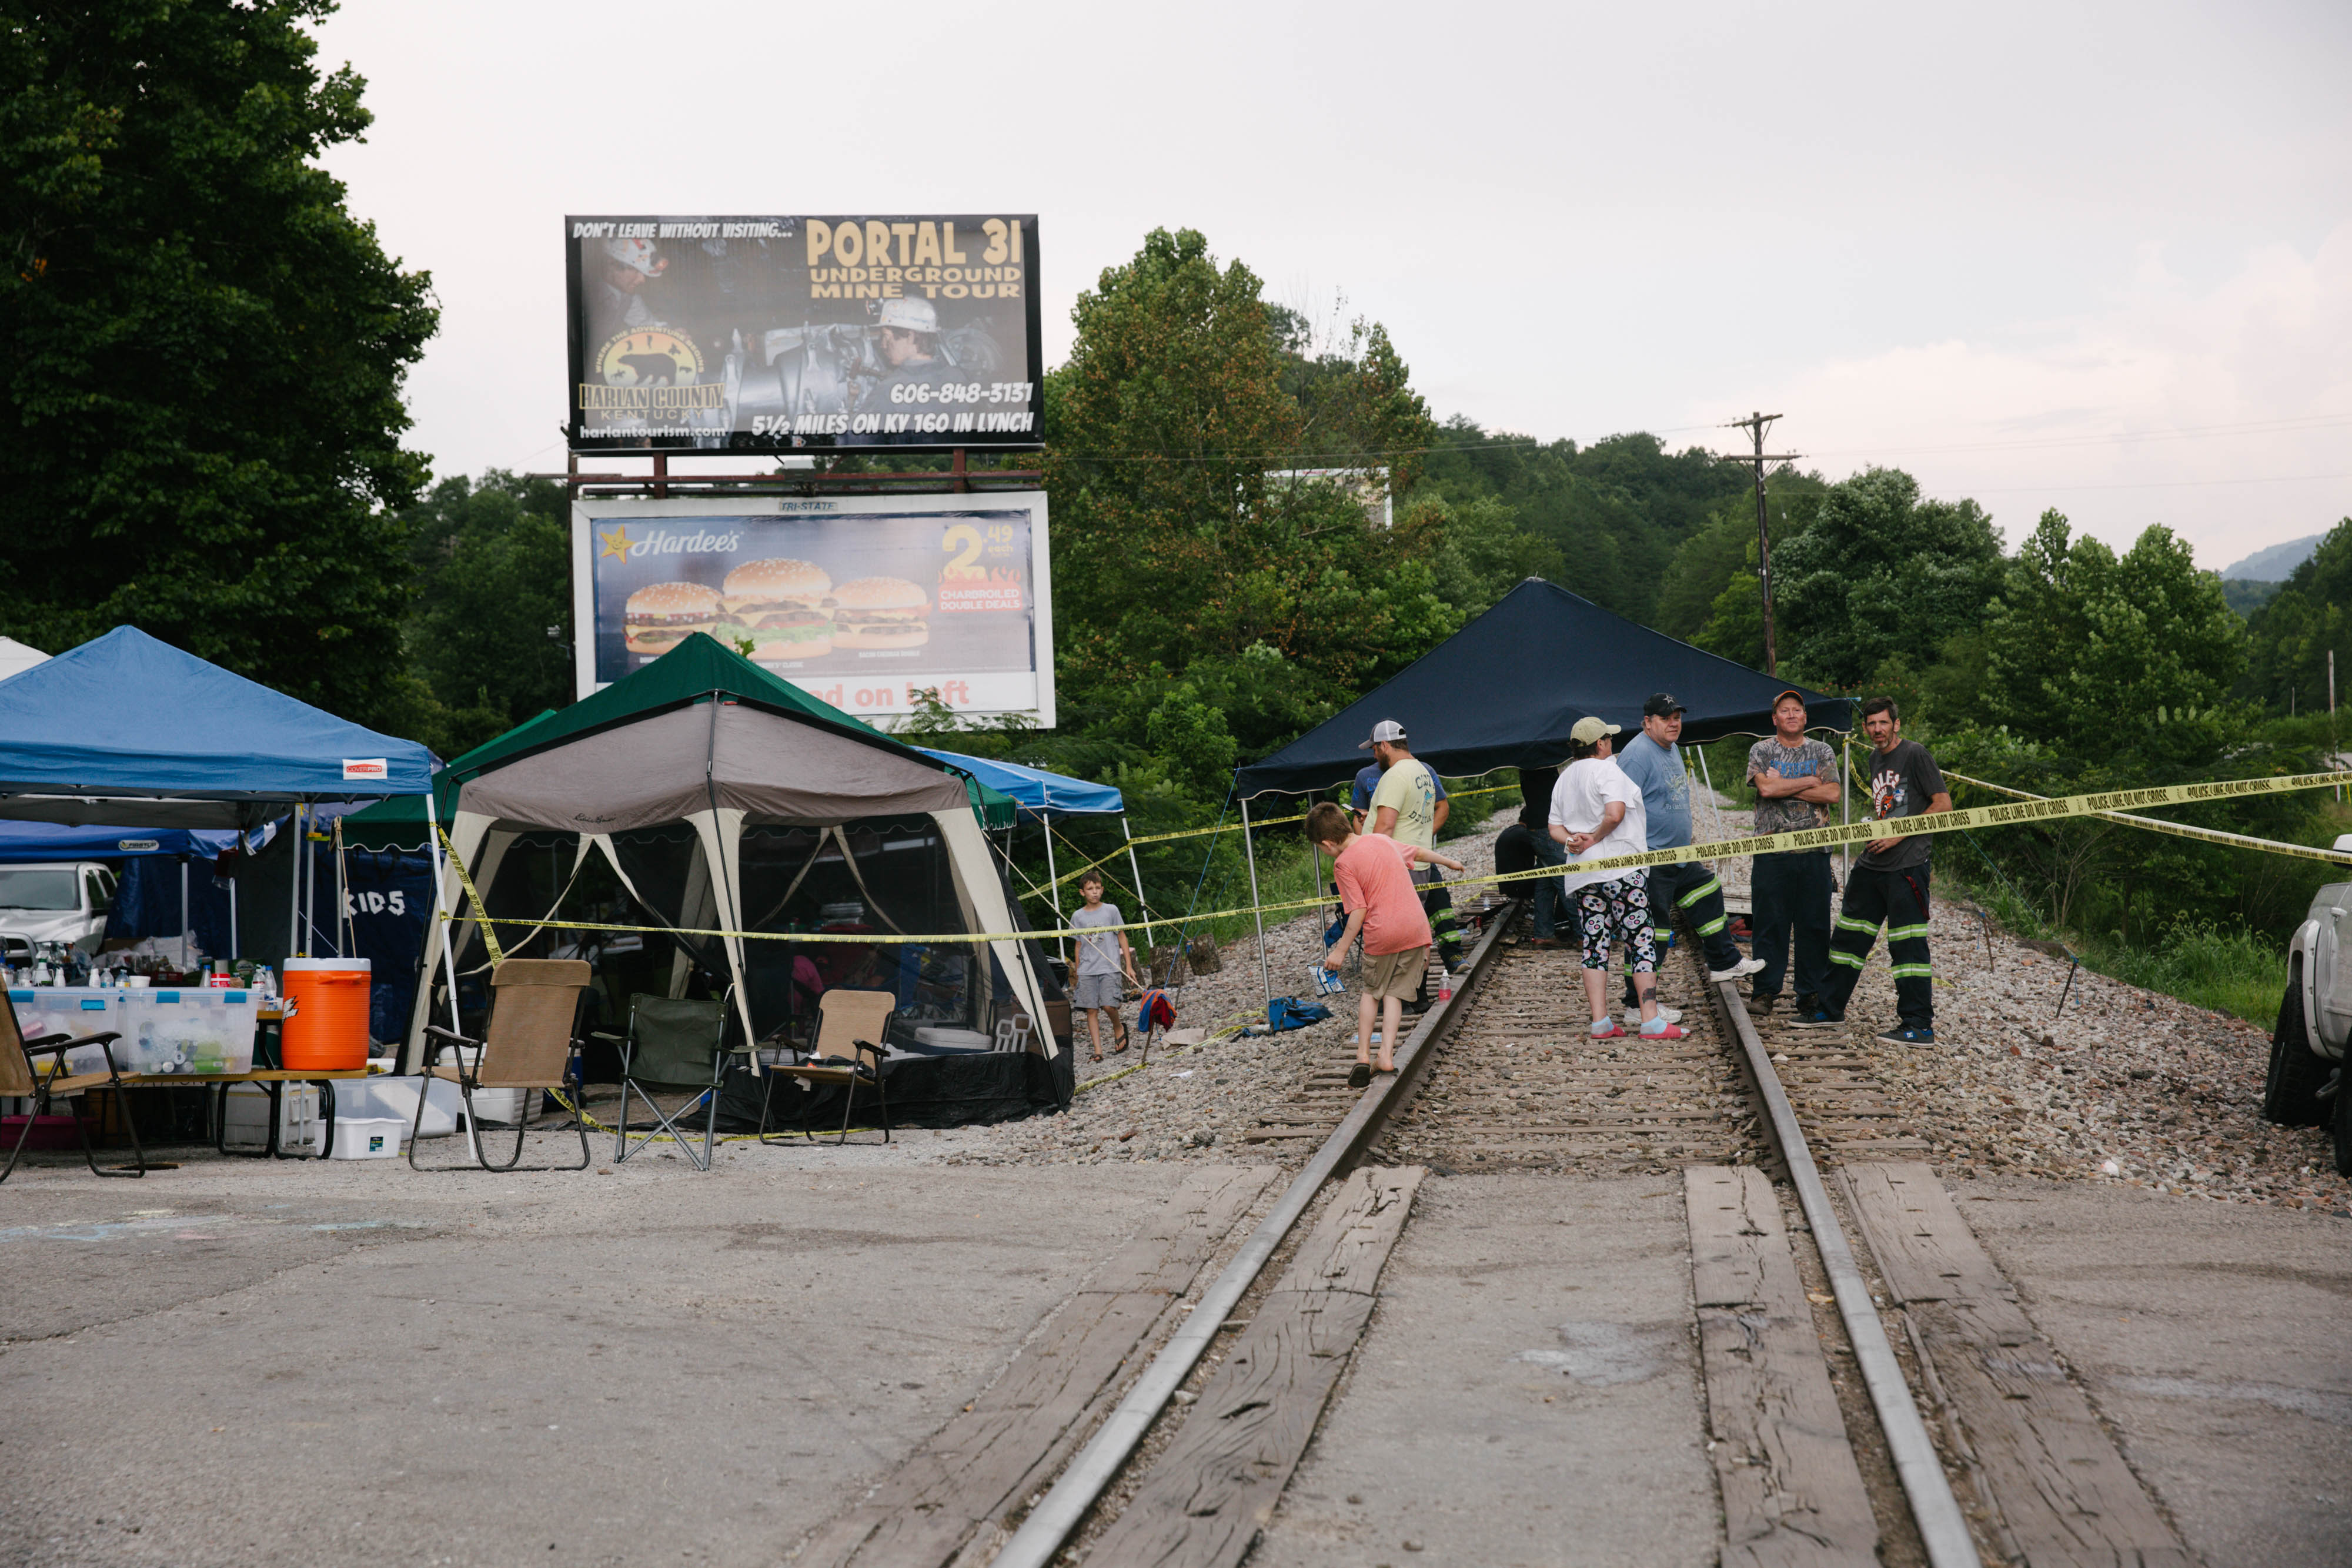 Supporters of miners stand on train tracks in Cumberland, Kentucky, U.S., on Friday, Aug. 2, 2019. The miners have been working in shifts to block railroad tracks leading to a Blackjewel mine outside since Monday afternoon, Harlan County Judge-Executive Dan Mosley said in an interview. (Meg Roussos/Bloomberg via Getty Images)